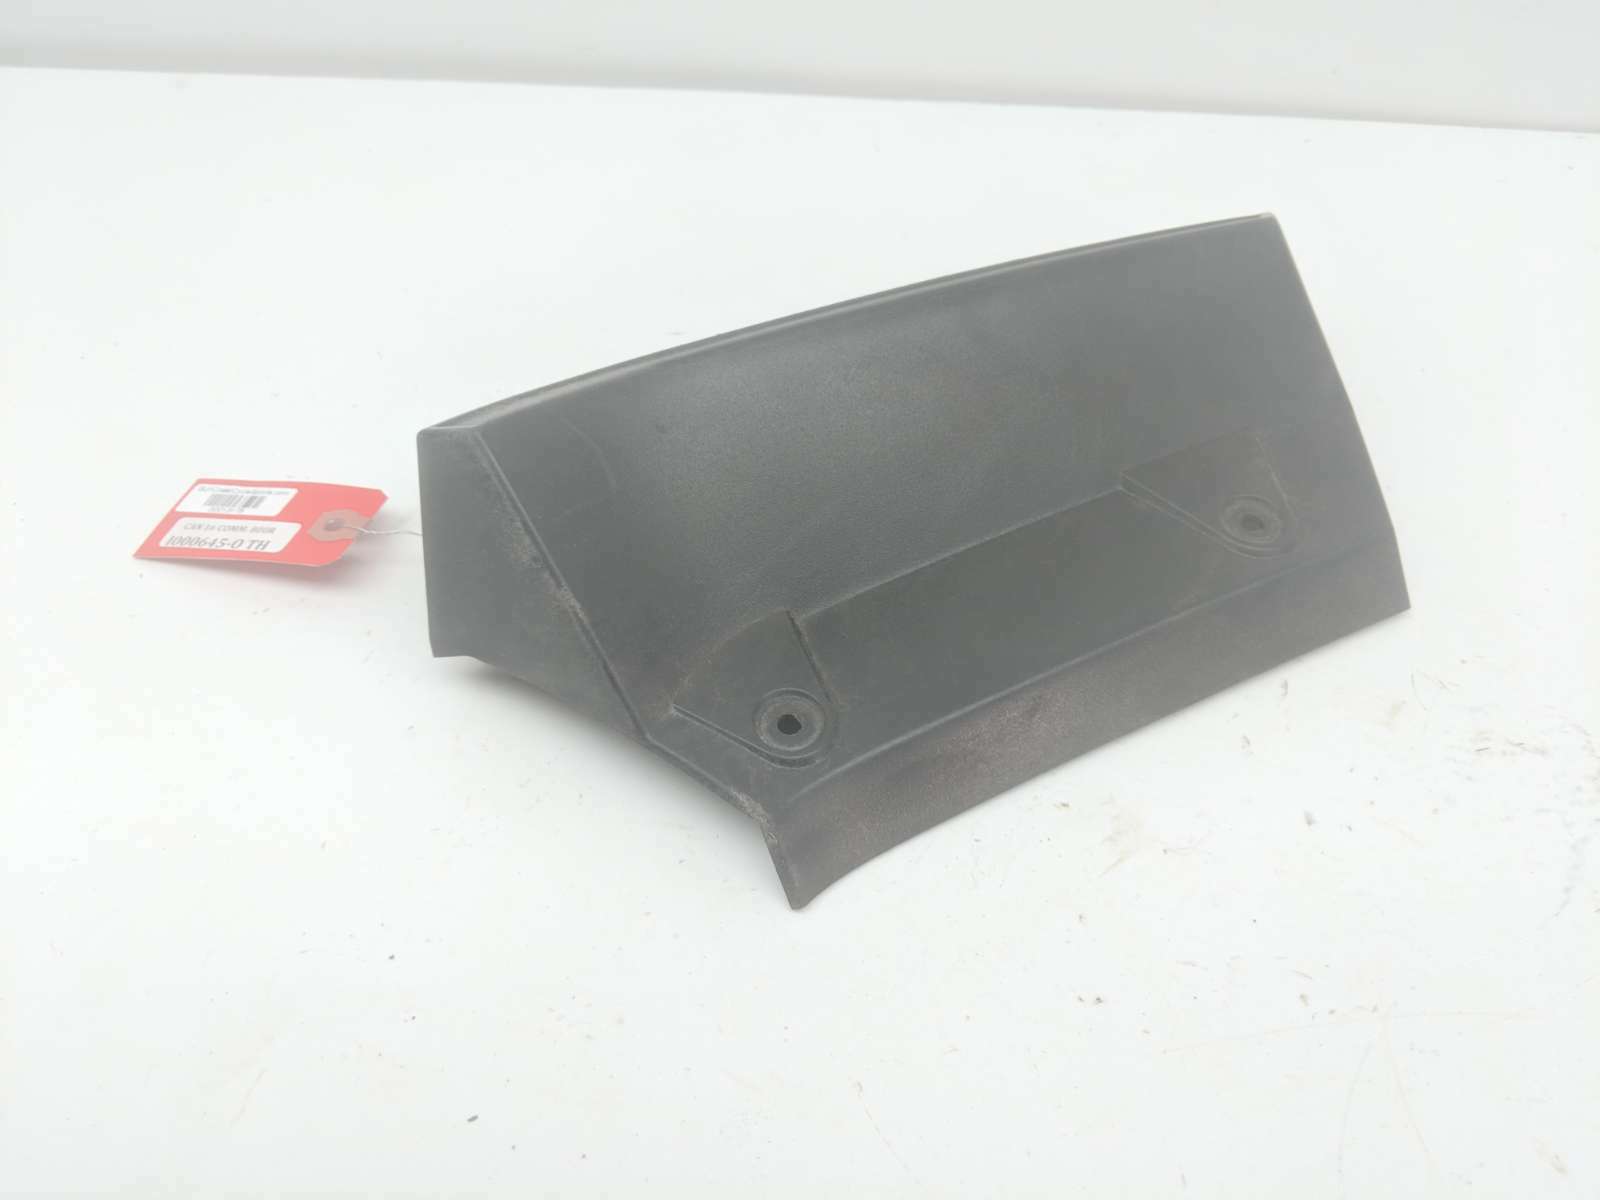 16 Can Am Commander 800R XT Rear Right Frame Guard Cover Protector